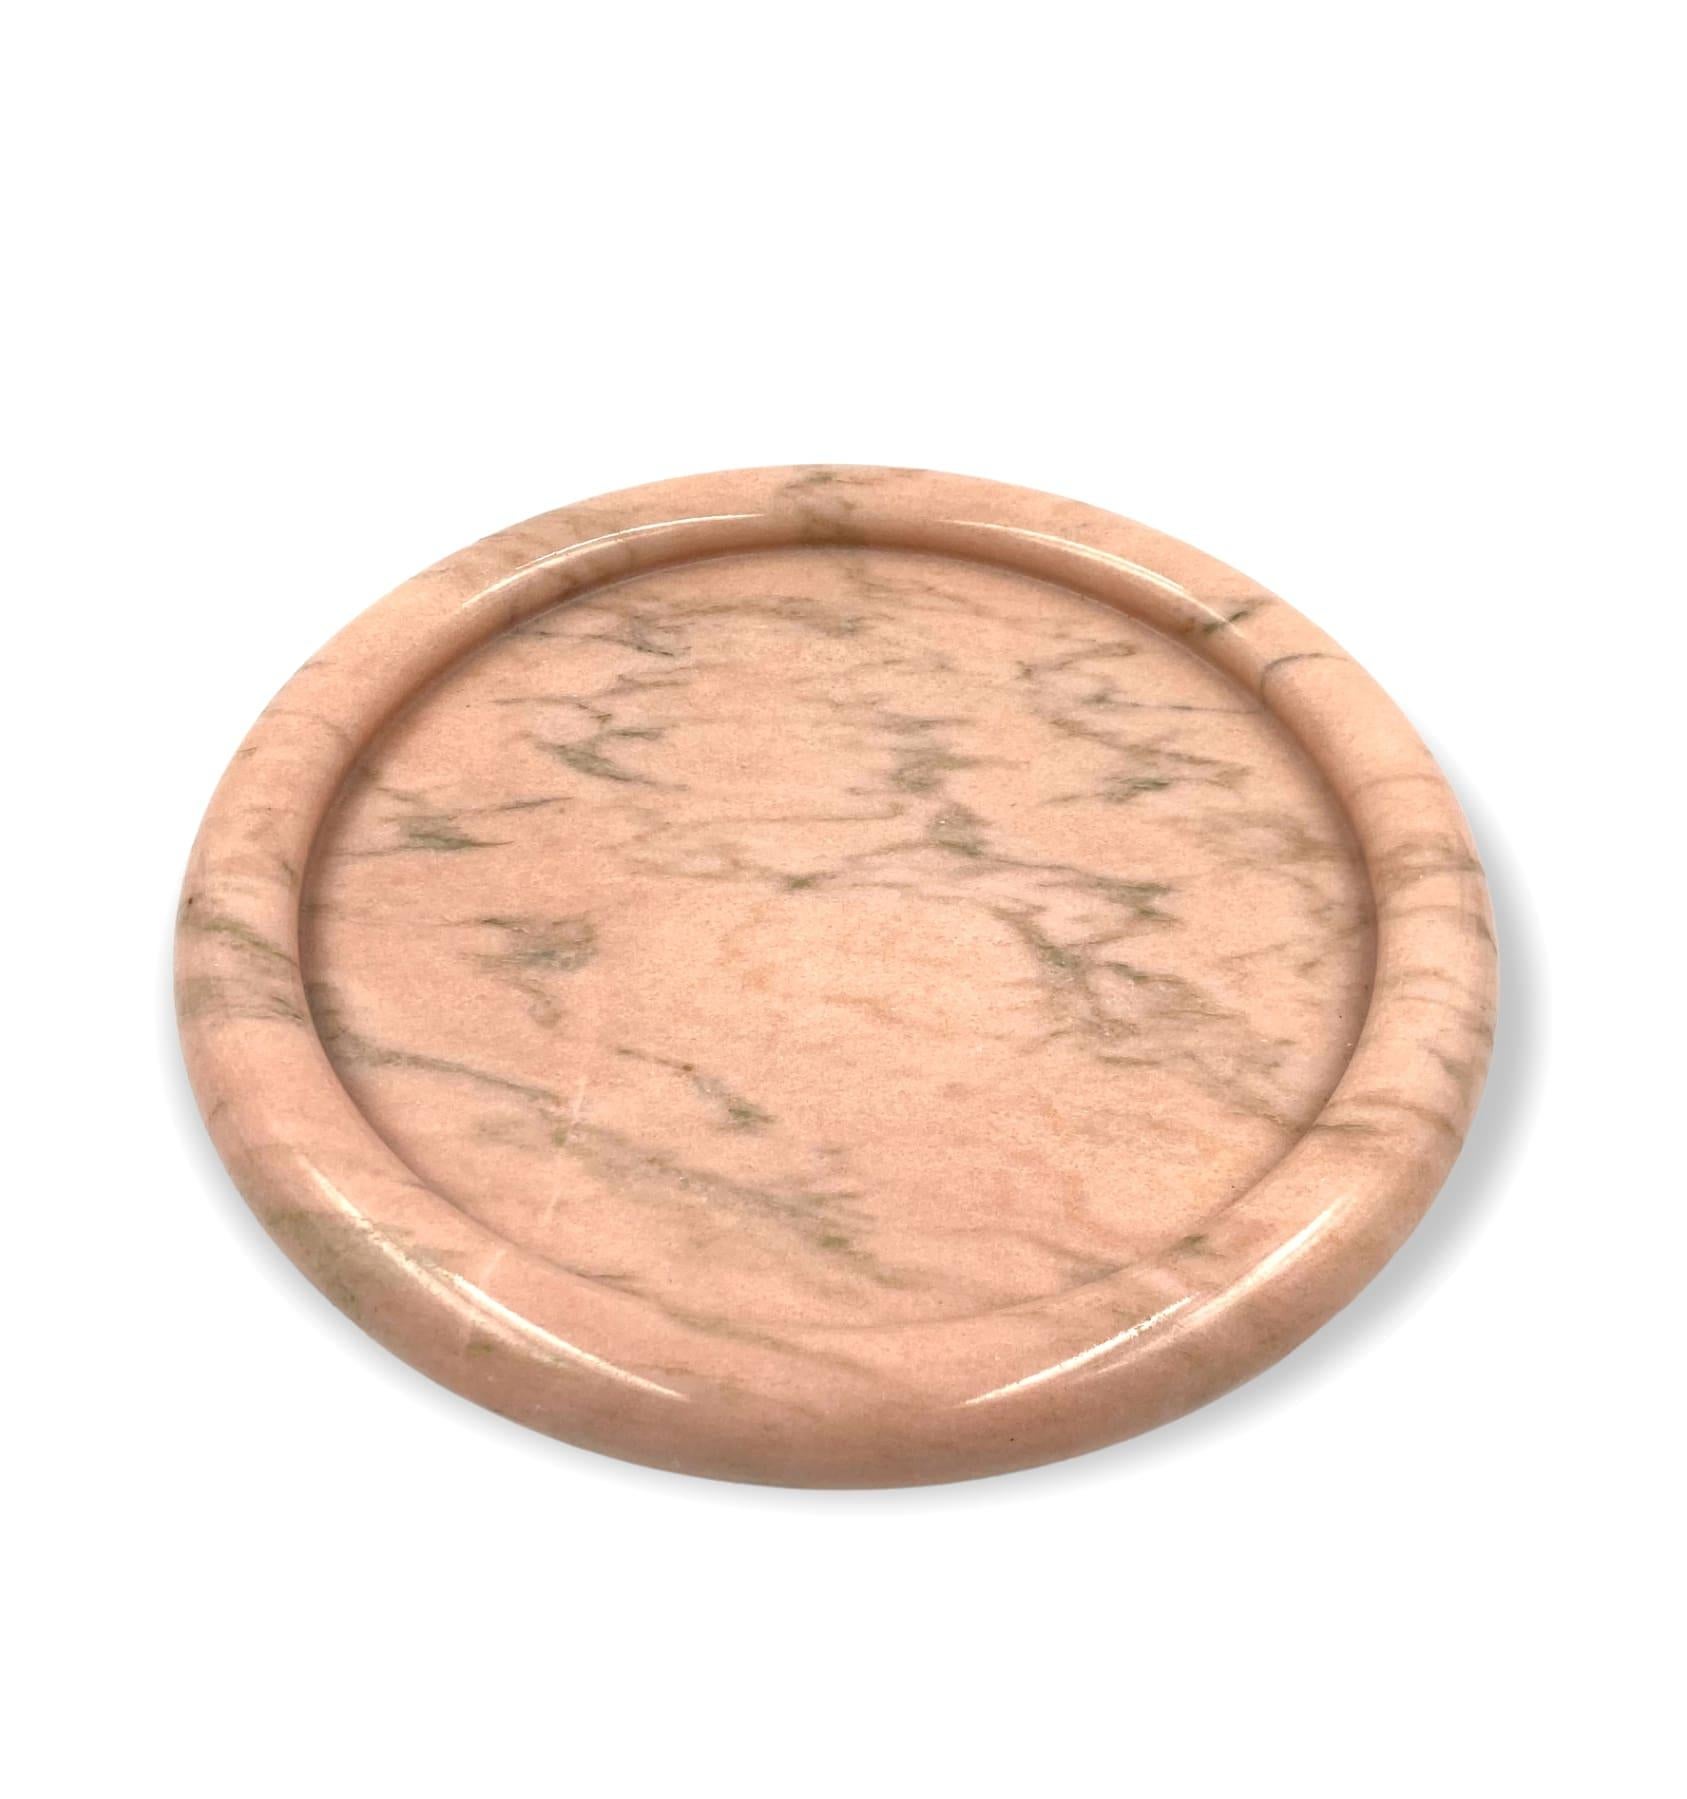 Hollywood Regency Sergio Asti, Pink Portuguese Marble Centerpiece / Tray, Up&Up Italy, 1970s For Sale